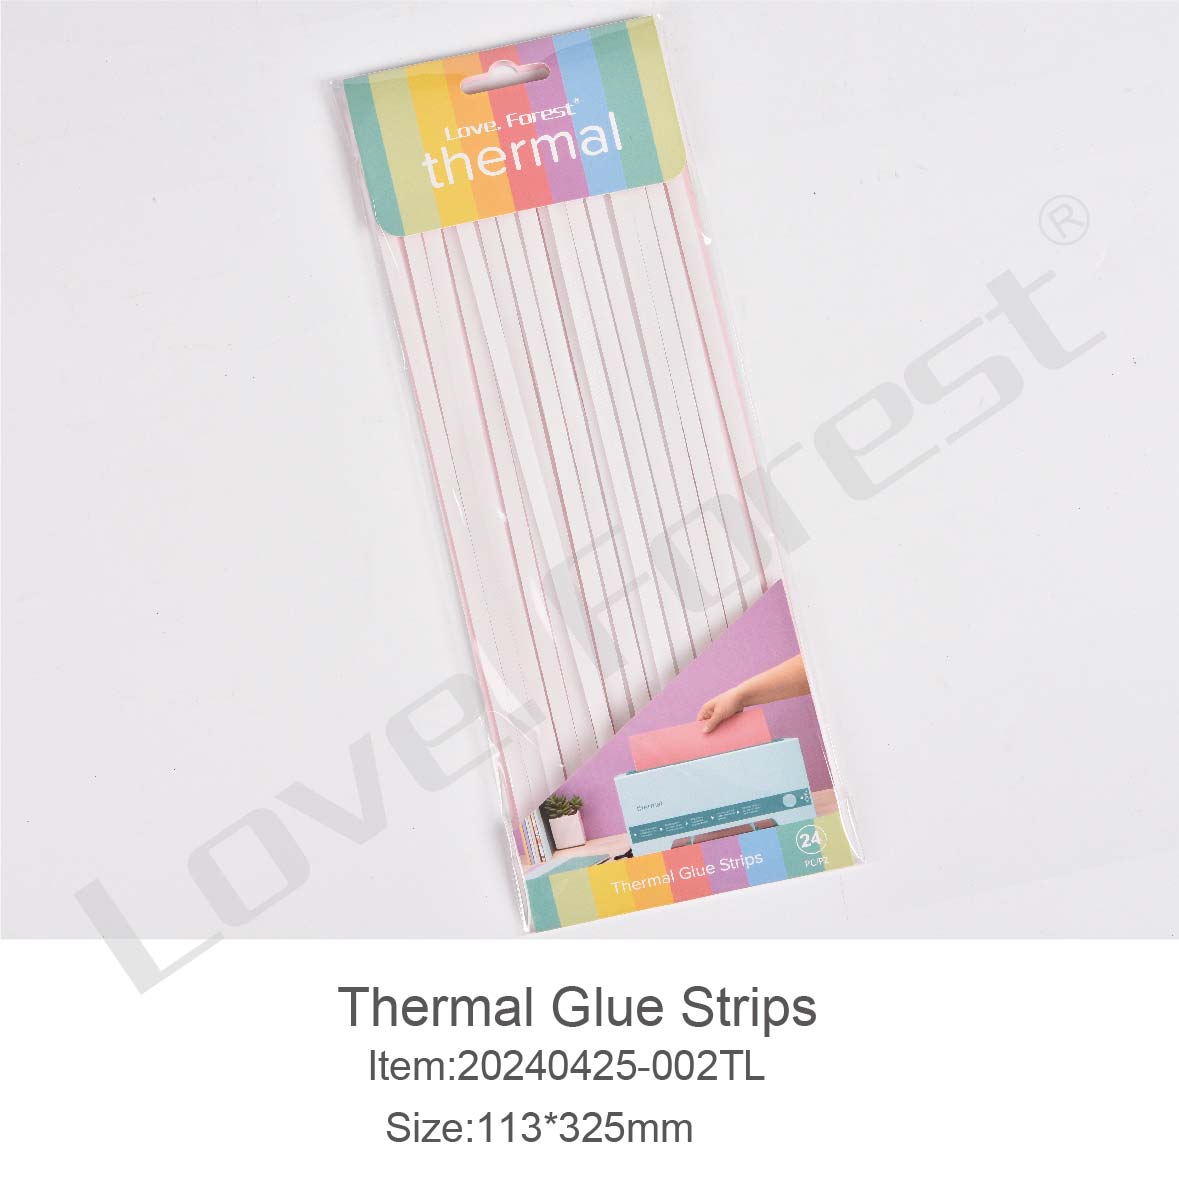 Thermal Glue Strips